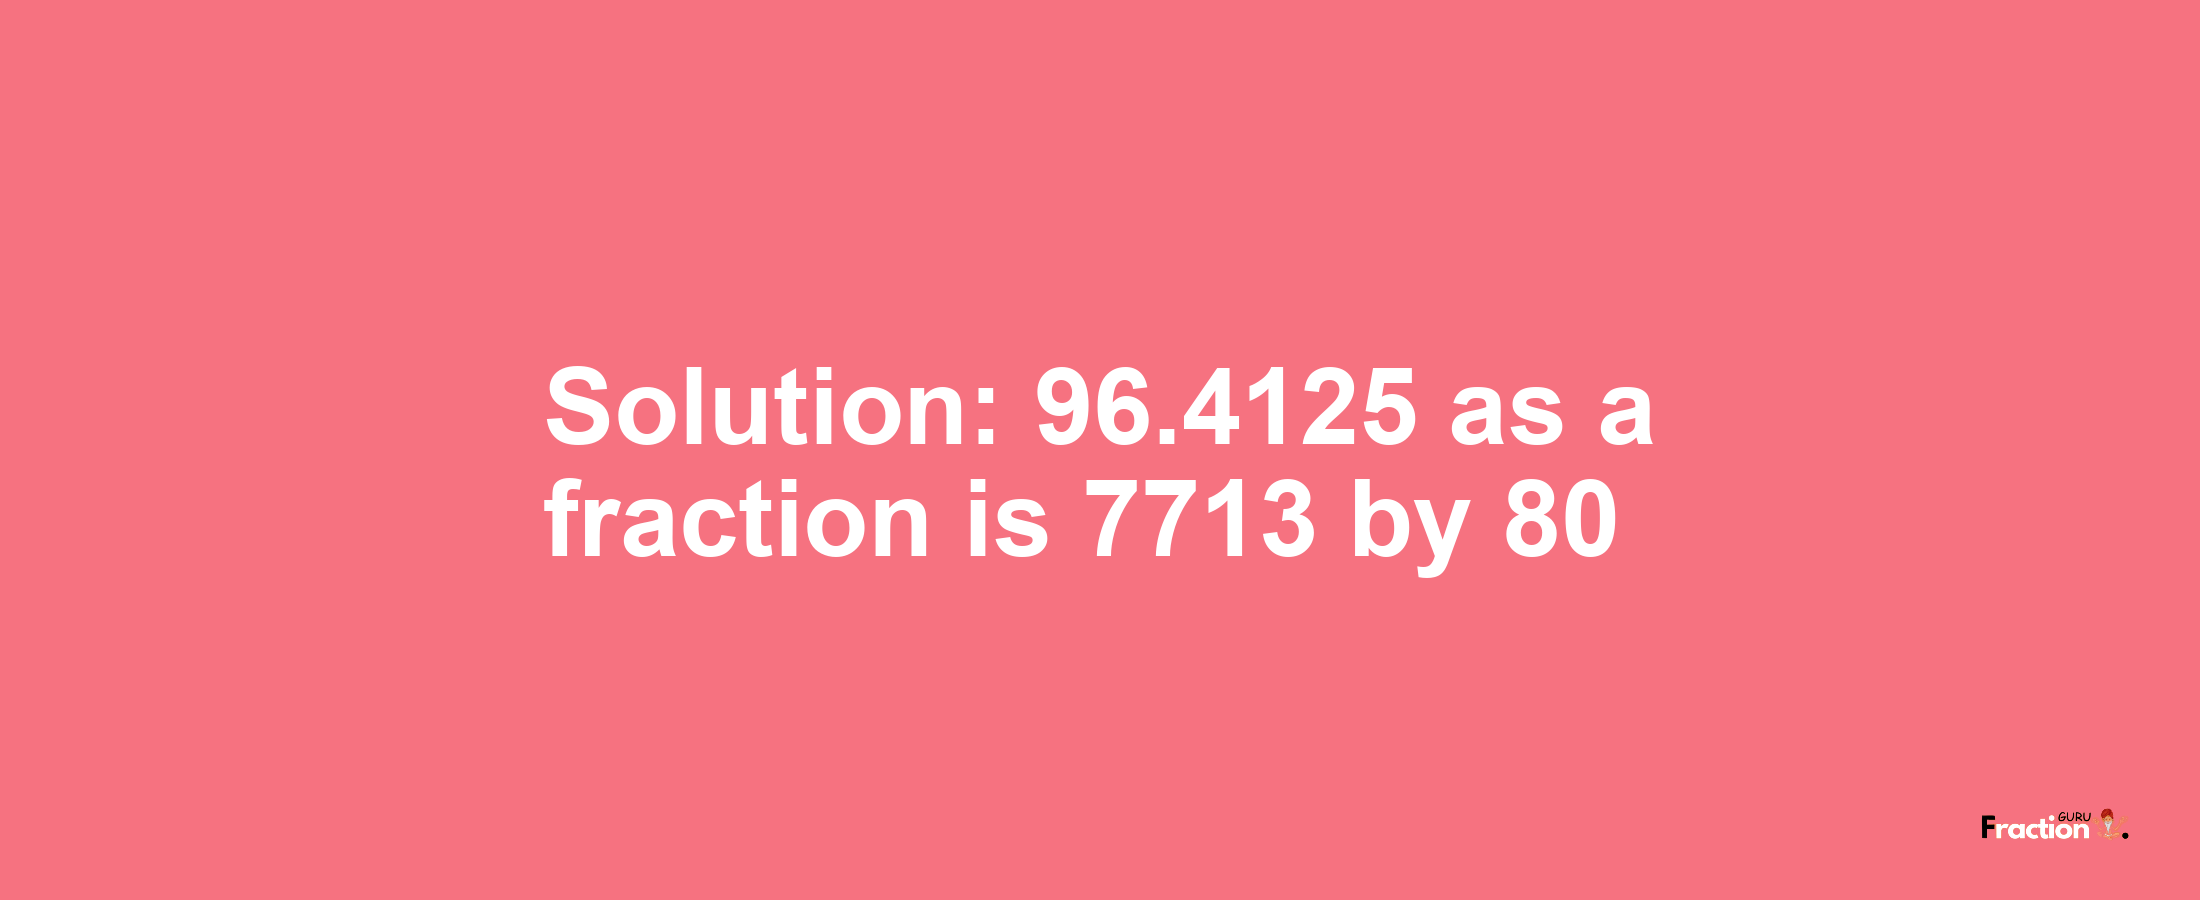 Solution:96.4125 as a fraction is 7713/80